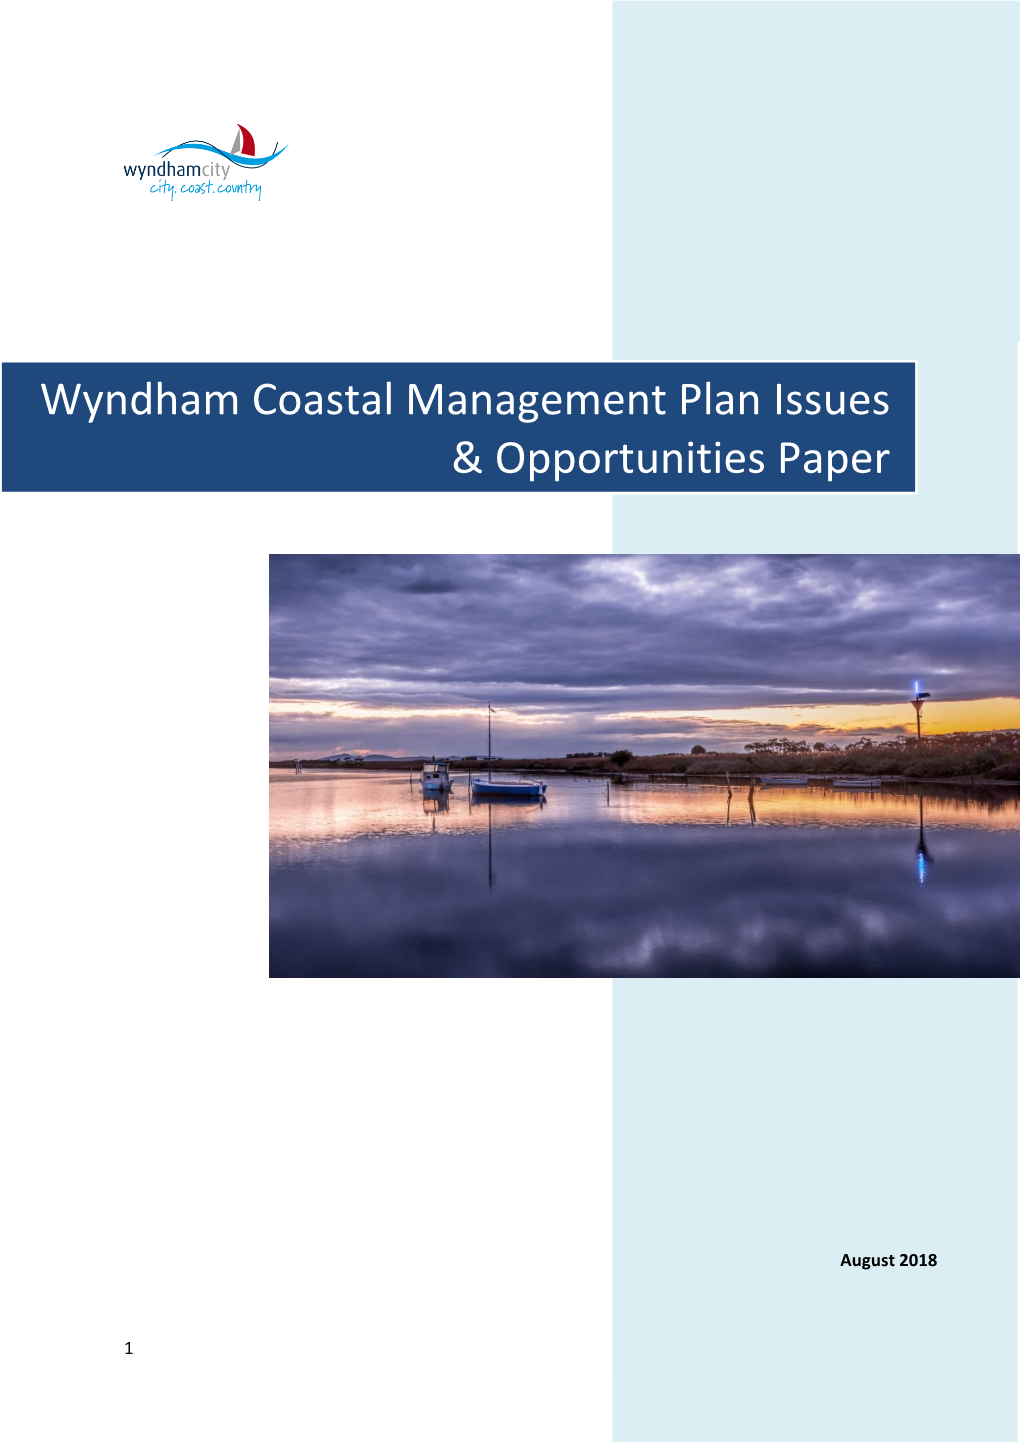 Wyndham Coastal Management Plan Issues & Opportunities Paper